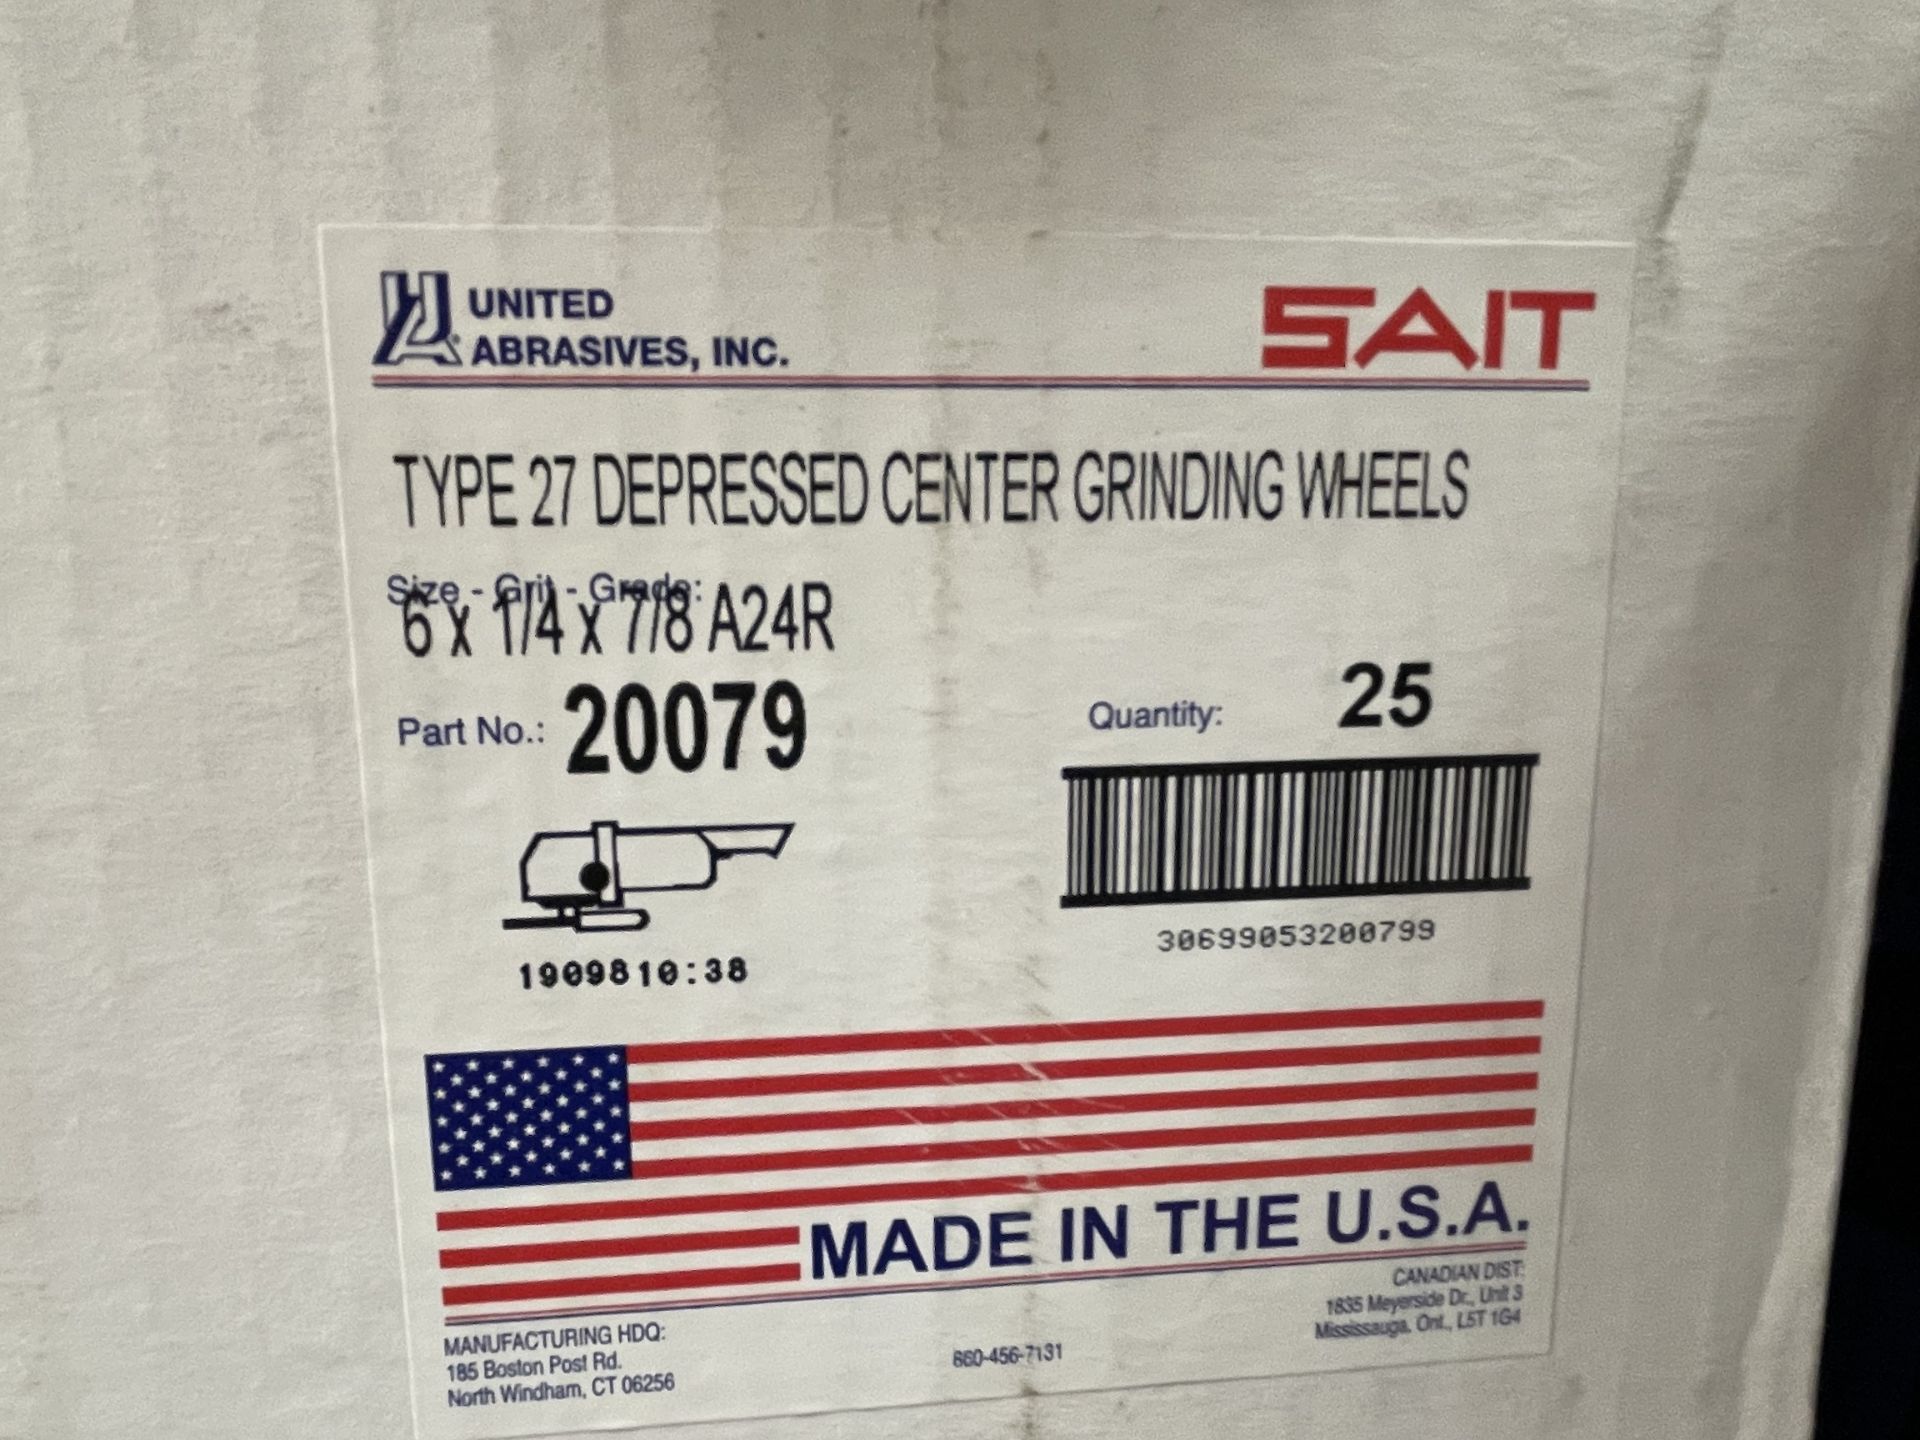 Lot of Brand New Type 27 Depressed Center Grinding Wheels - Upland - Image 2 of 7